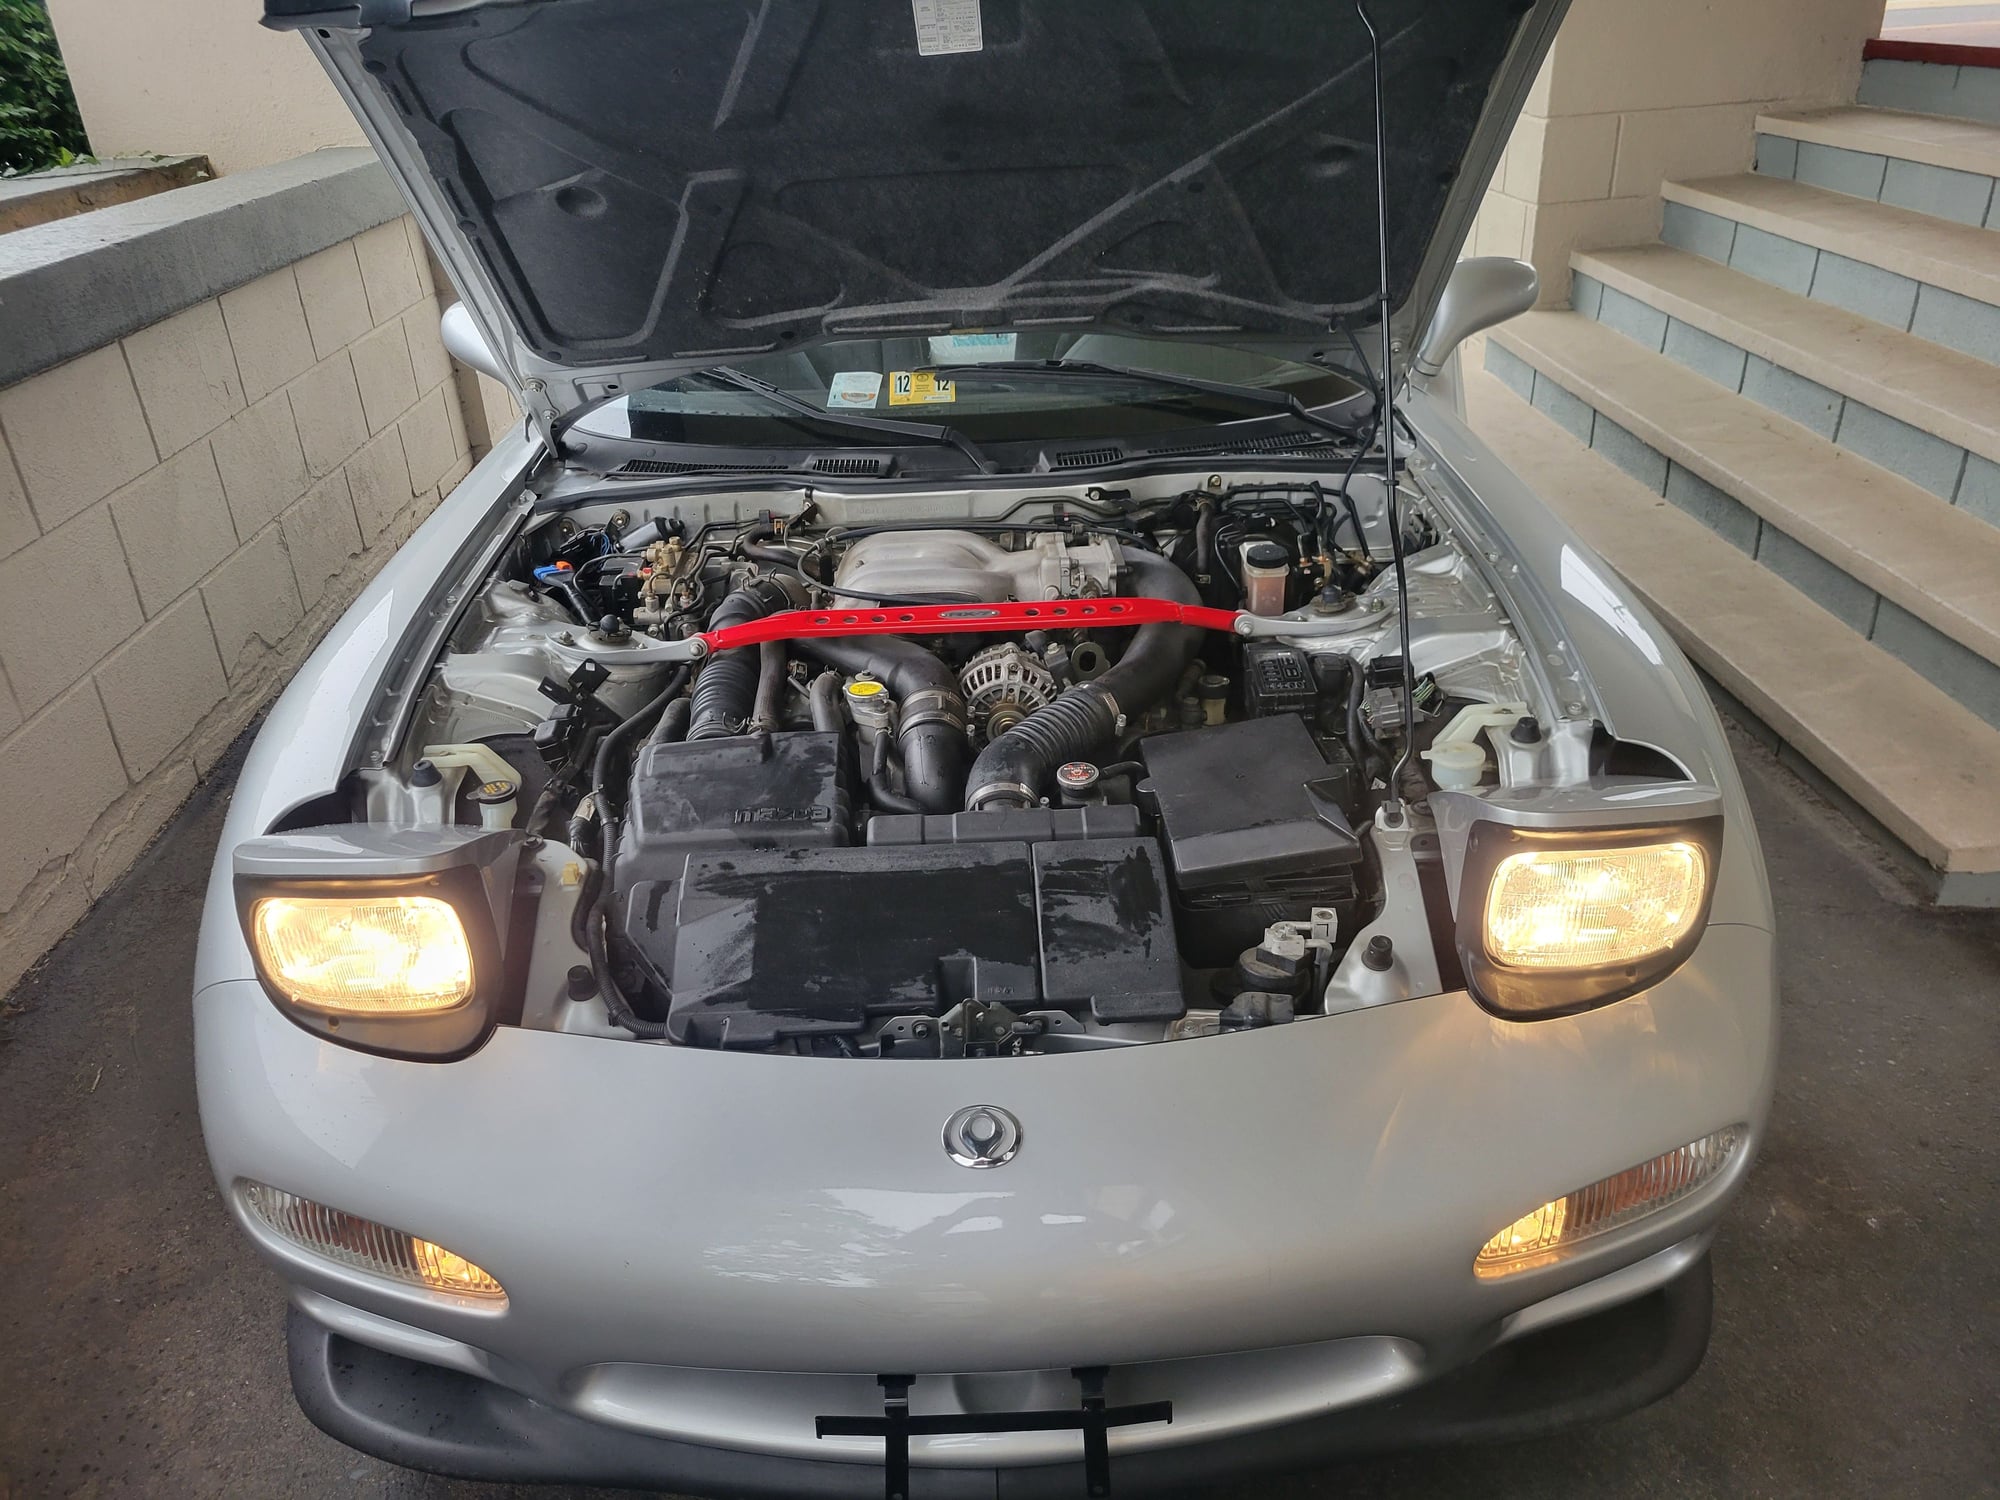 1994 Mazda RX-7 - 1994 Rx7 R2 Extremely low mileage, - Used - VIN JM1FD3339R0300977 - 4,216 Miles - 2 cyl - 2WD - Manual - Coupe - Silver - Harrisonburg, VA 22801, United States